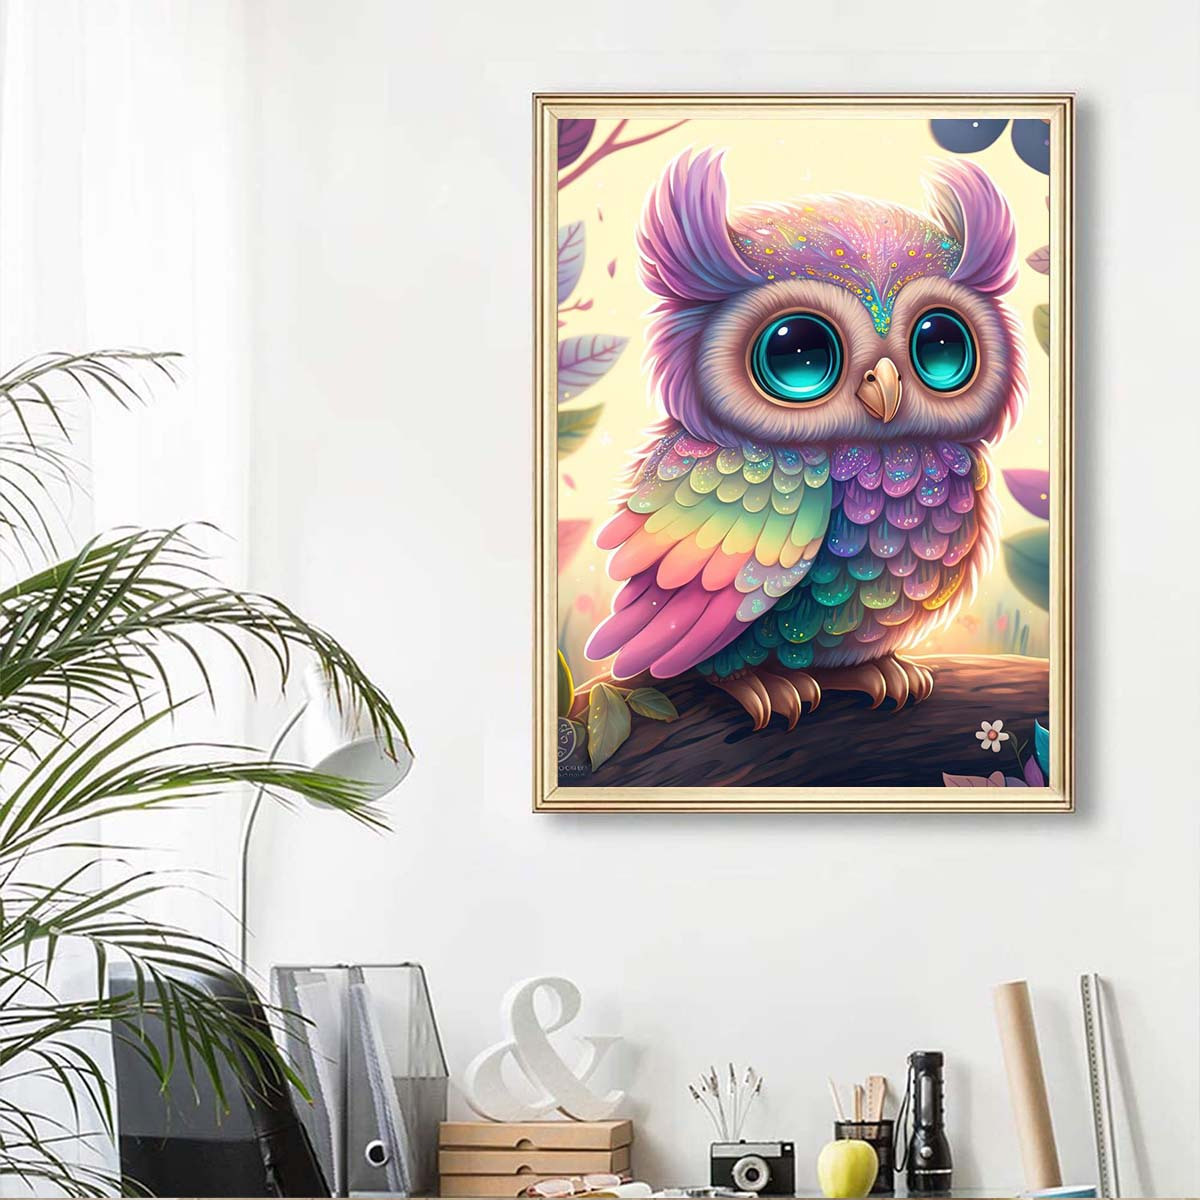 16X24Inch The Star Owl Diamond Painting, Adult Children's Interactive  Handmade Digital Painting Craft Diamond Painting Kits, Suitable for Room  Decor